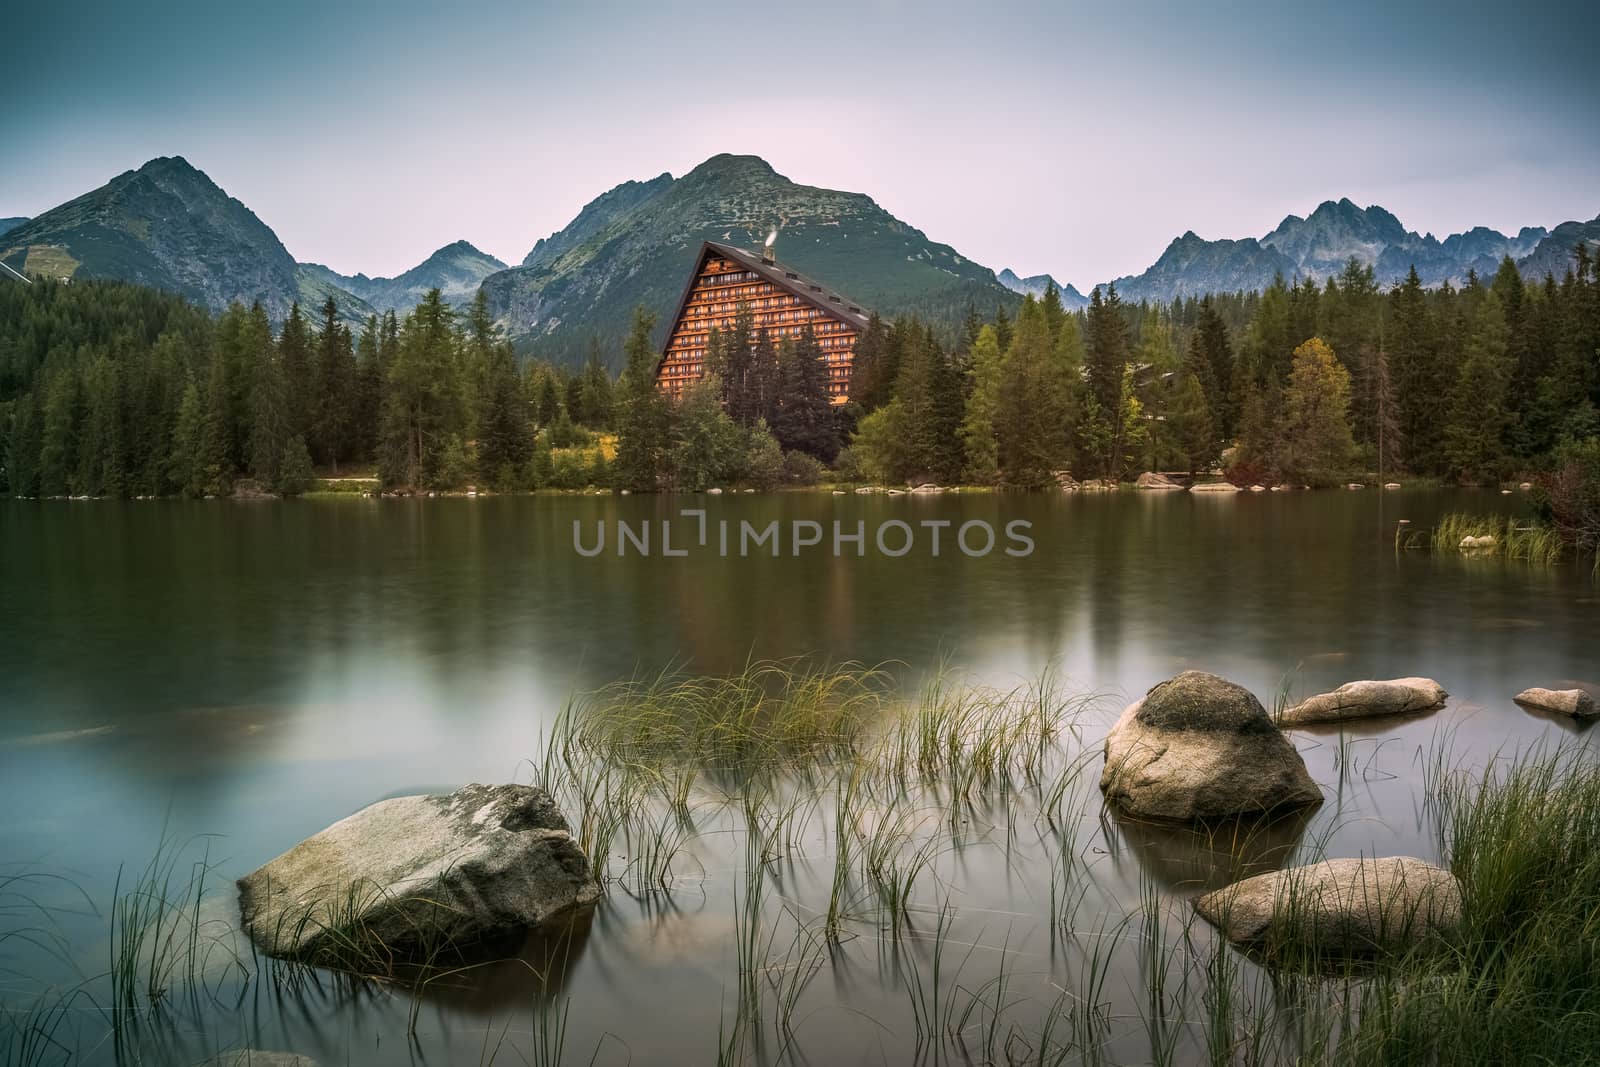 Strbske Pleso Mountain Lake in High Tatras Mountains, Slovakia with Rocks and Grass in Foreground